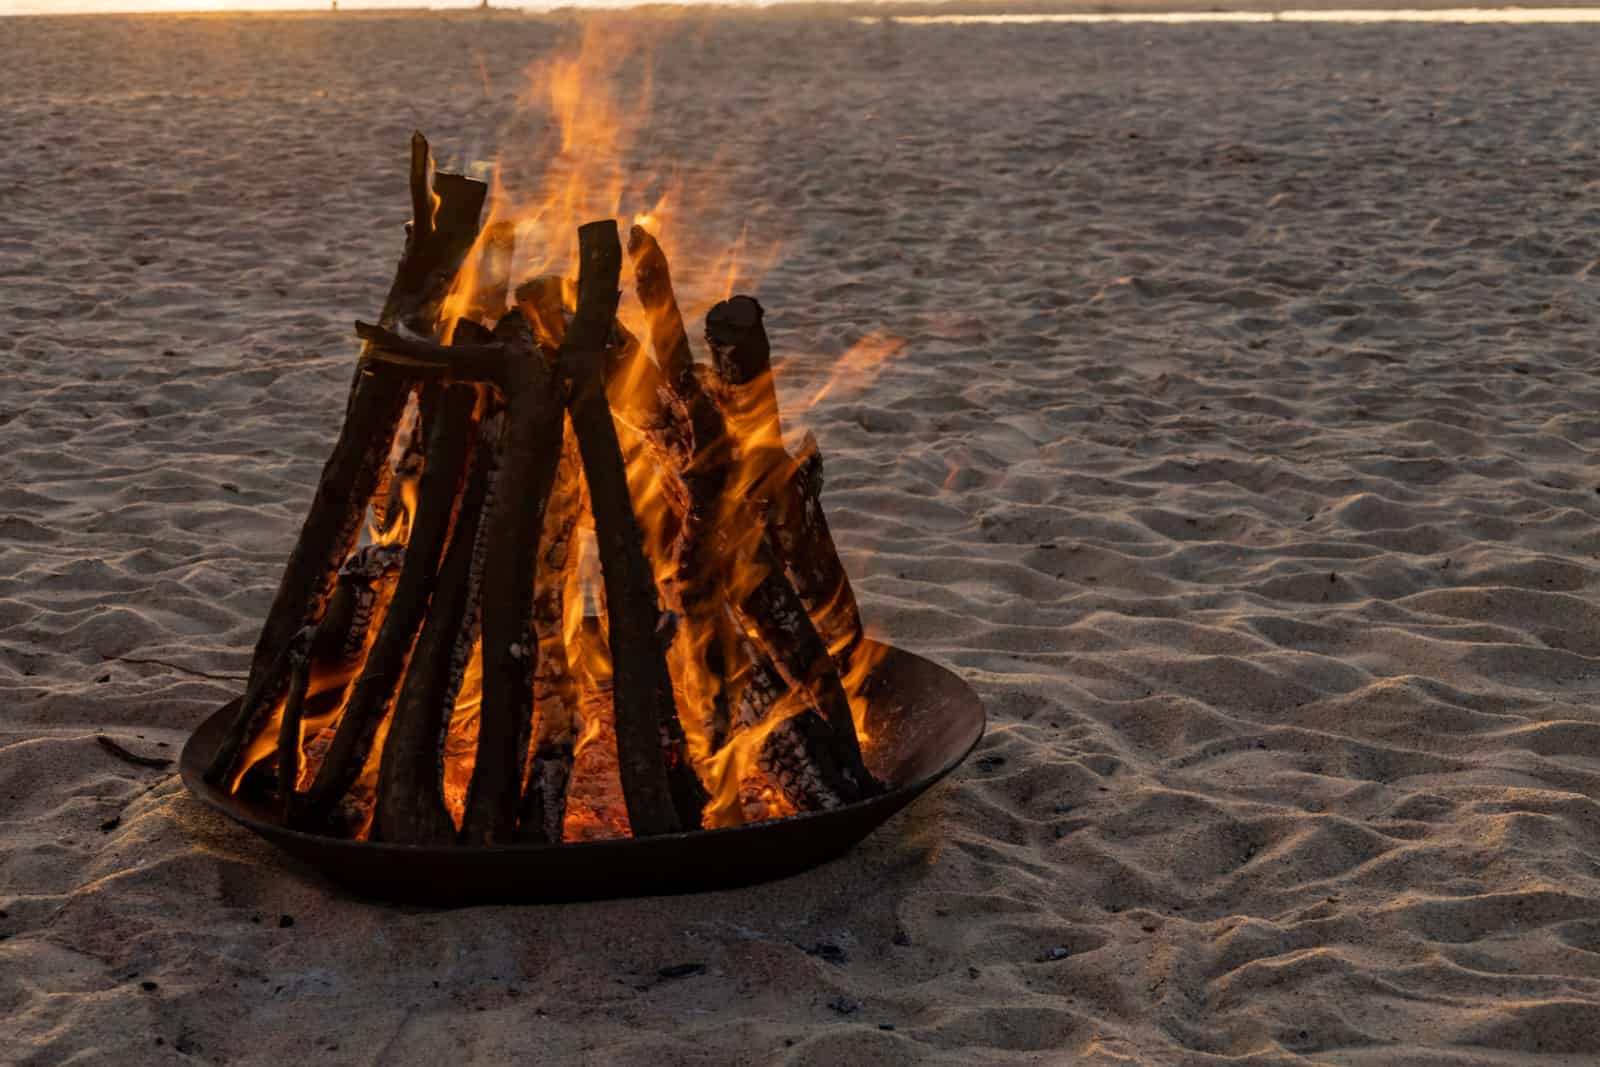 Campfire on a beach during sunset.